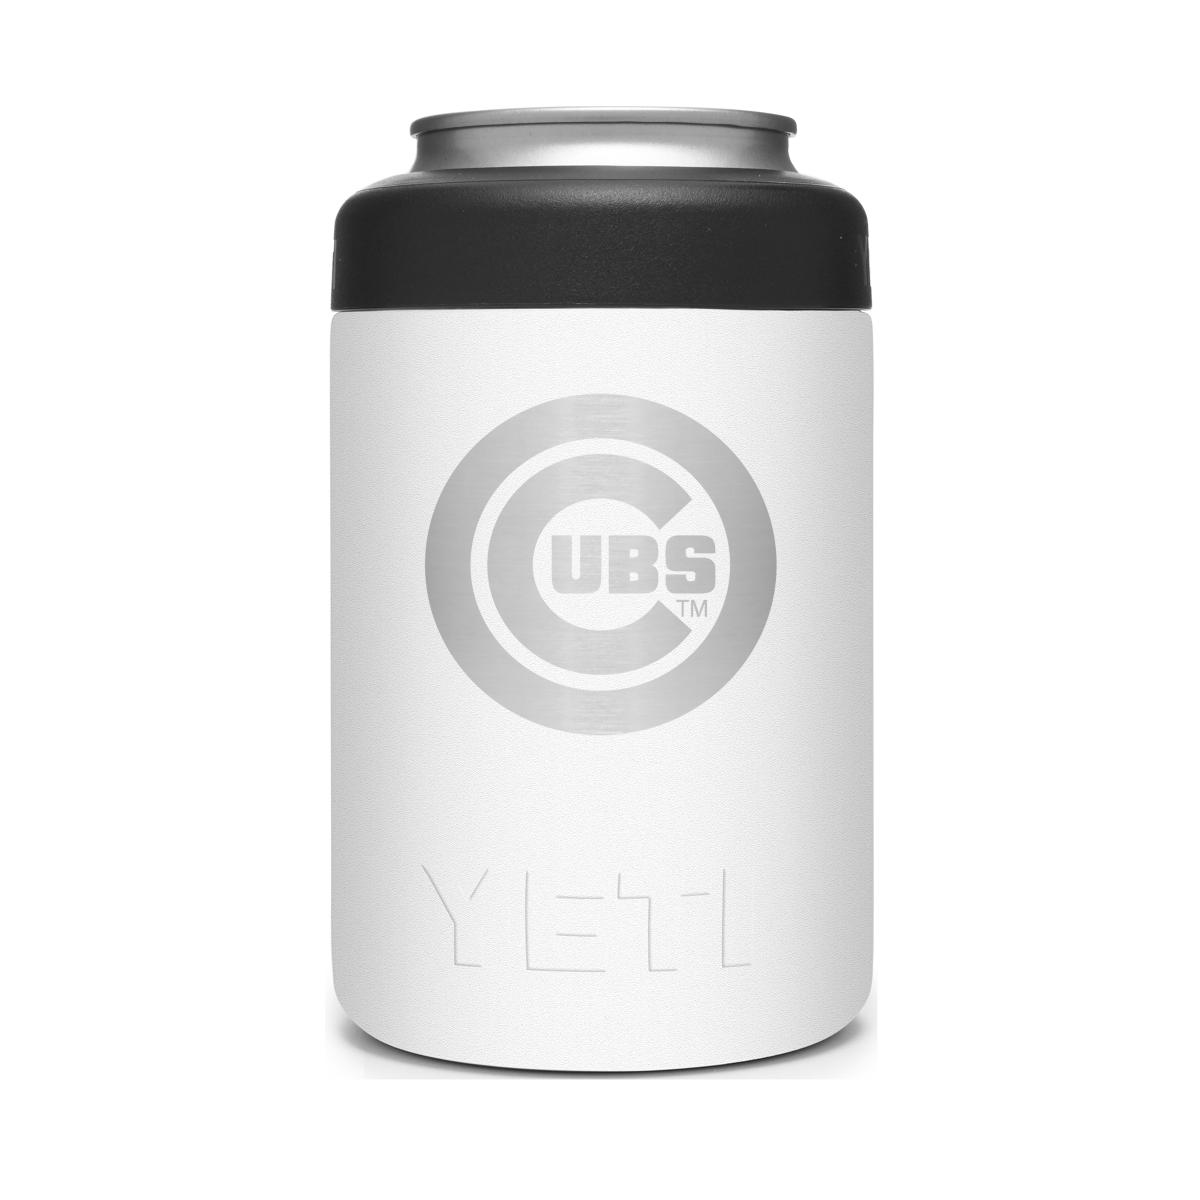 Chicago Cubs YETI Coolers and Drinkware, where to buy Cubs YETI gear now -  FanNation